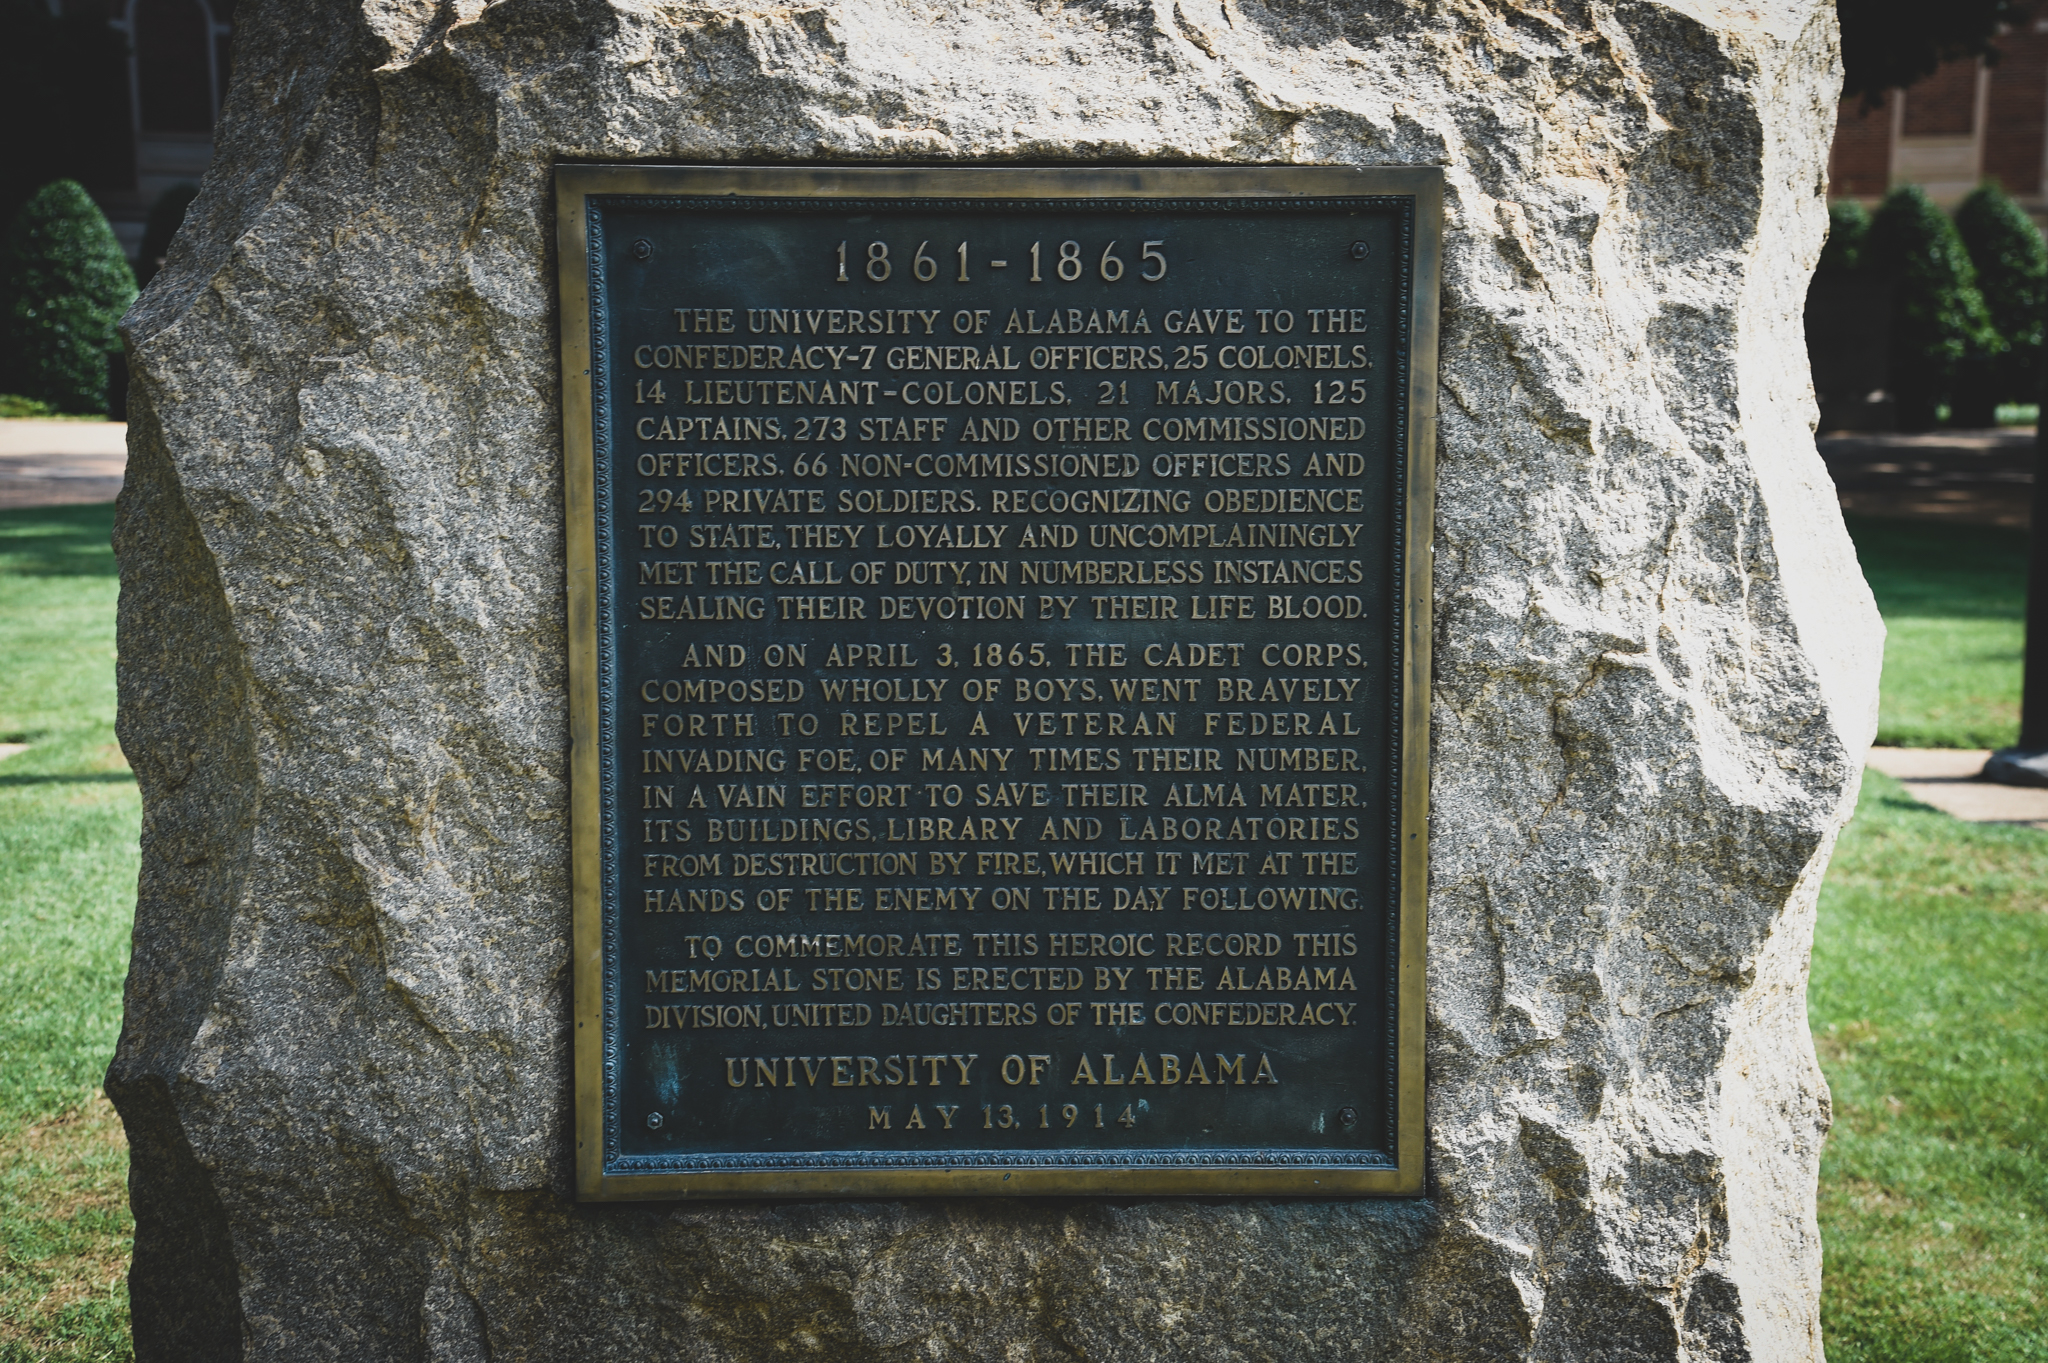 A monument honoring Confederate soldiers, erected by the Alabama Division of the United Daughters of the Confederacy in May 1914, remains at the Center of the Quad between Gorgas Library and Denny Chimes on the University of Alabama campus. Photo taken Wednesday, June 3, 2020. (Ben Flanagan / AL.com)